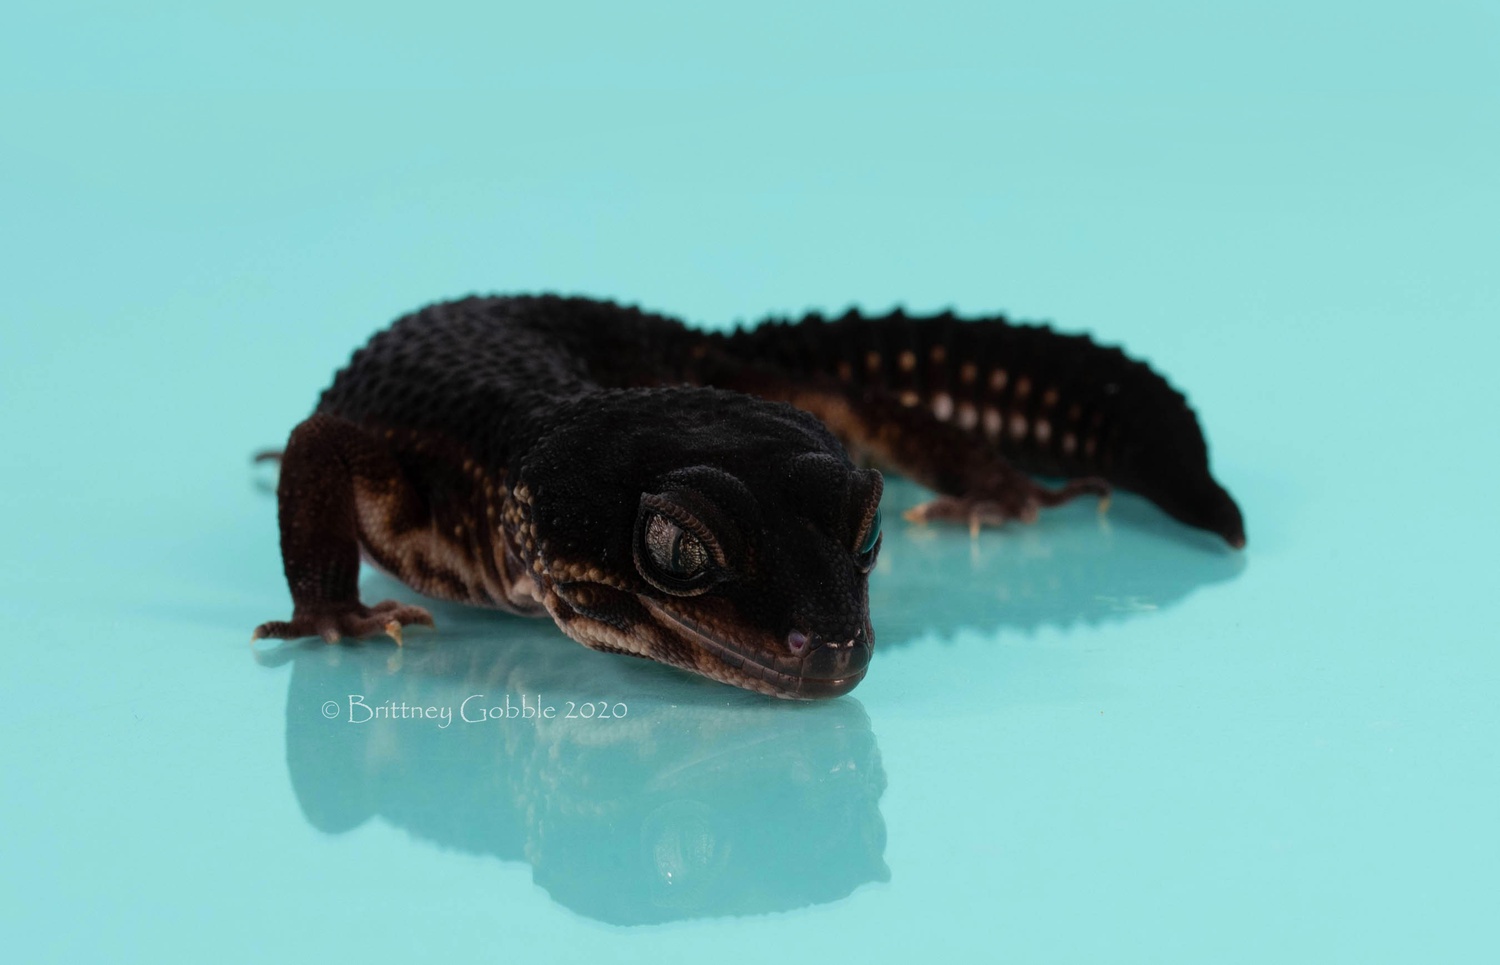 Pure Black Night Female Imported Proven Leopard Gecko by Gobble’s Reptiles